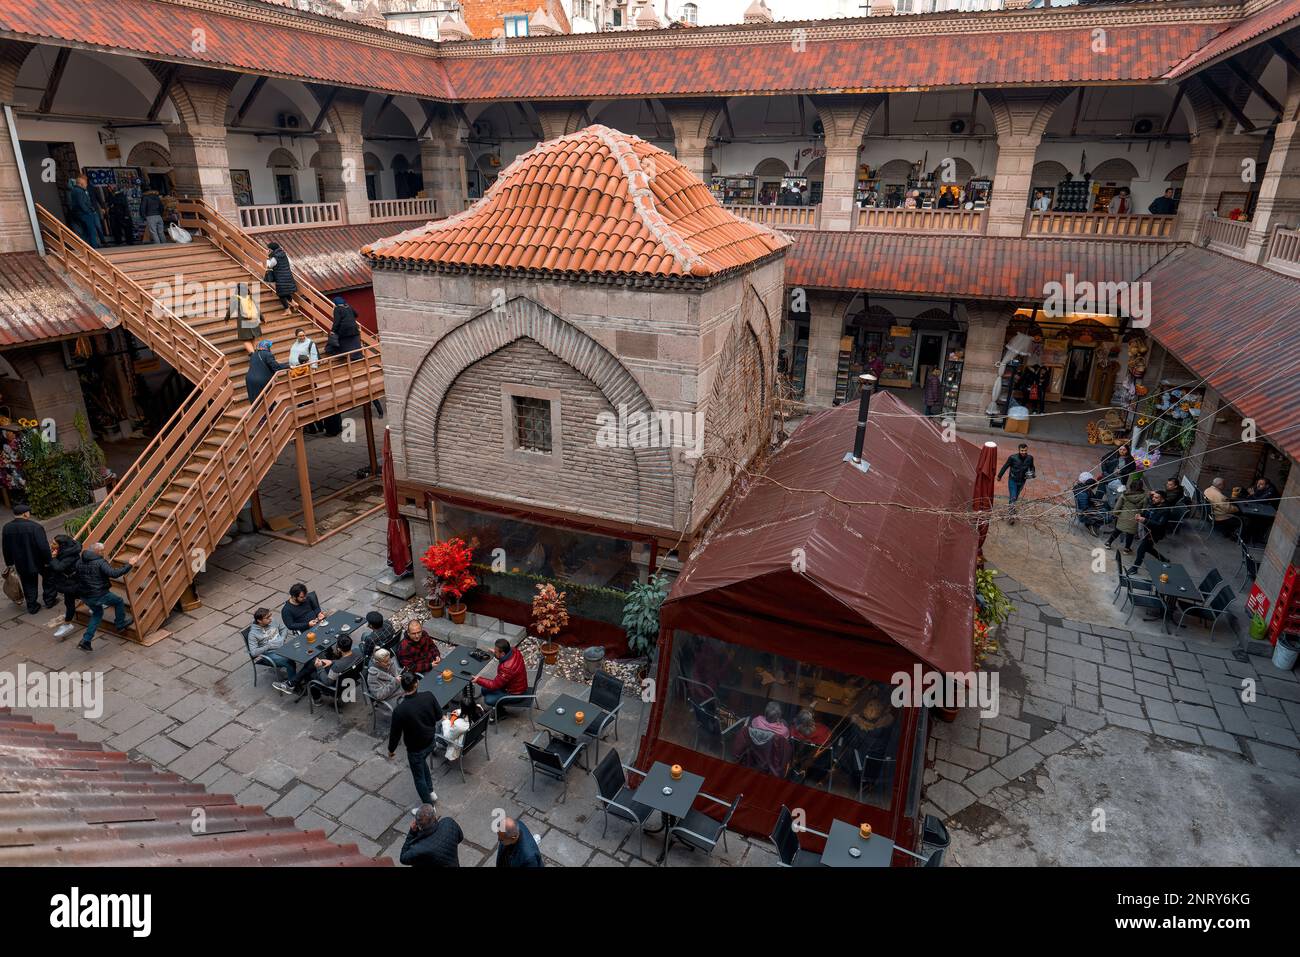 Ankara-Turkey: February 25, 2023: Local people and tourists shopping or sitting at cafe and talking in historical Suluhan caravanserai, constructred b Stock Photo